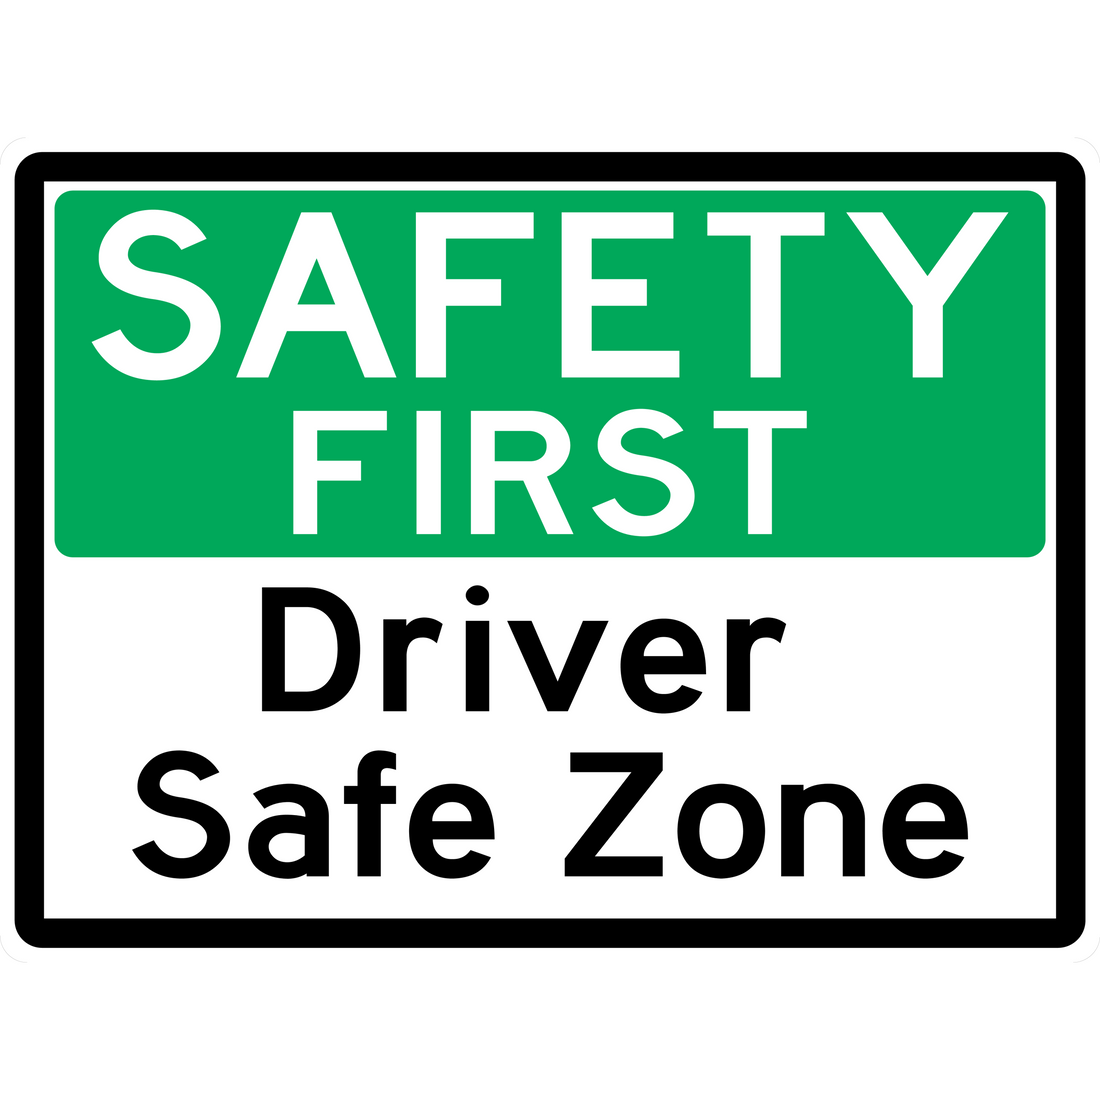 GENERAL-SAFETY-FIRST-DRIVER-SAFE-ZONE